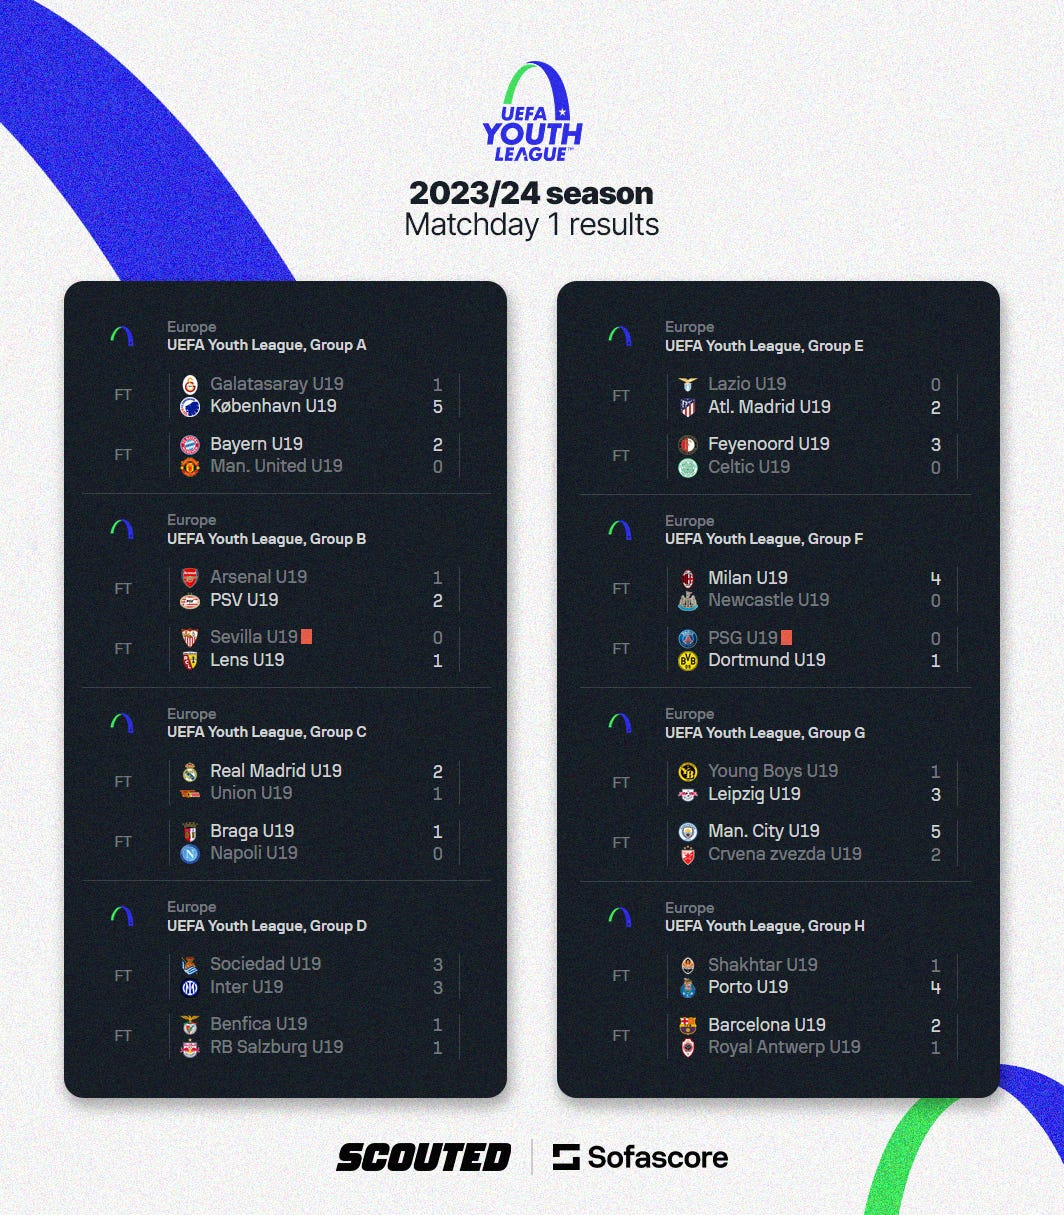 A graphic featuring the results from MD1 of the 2023/24 UEFA Youth League season, courtesy of Sofascore